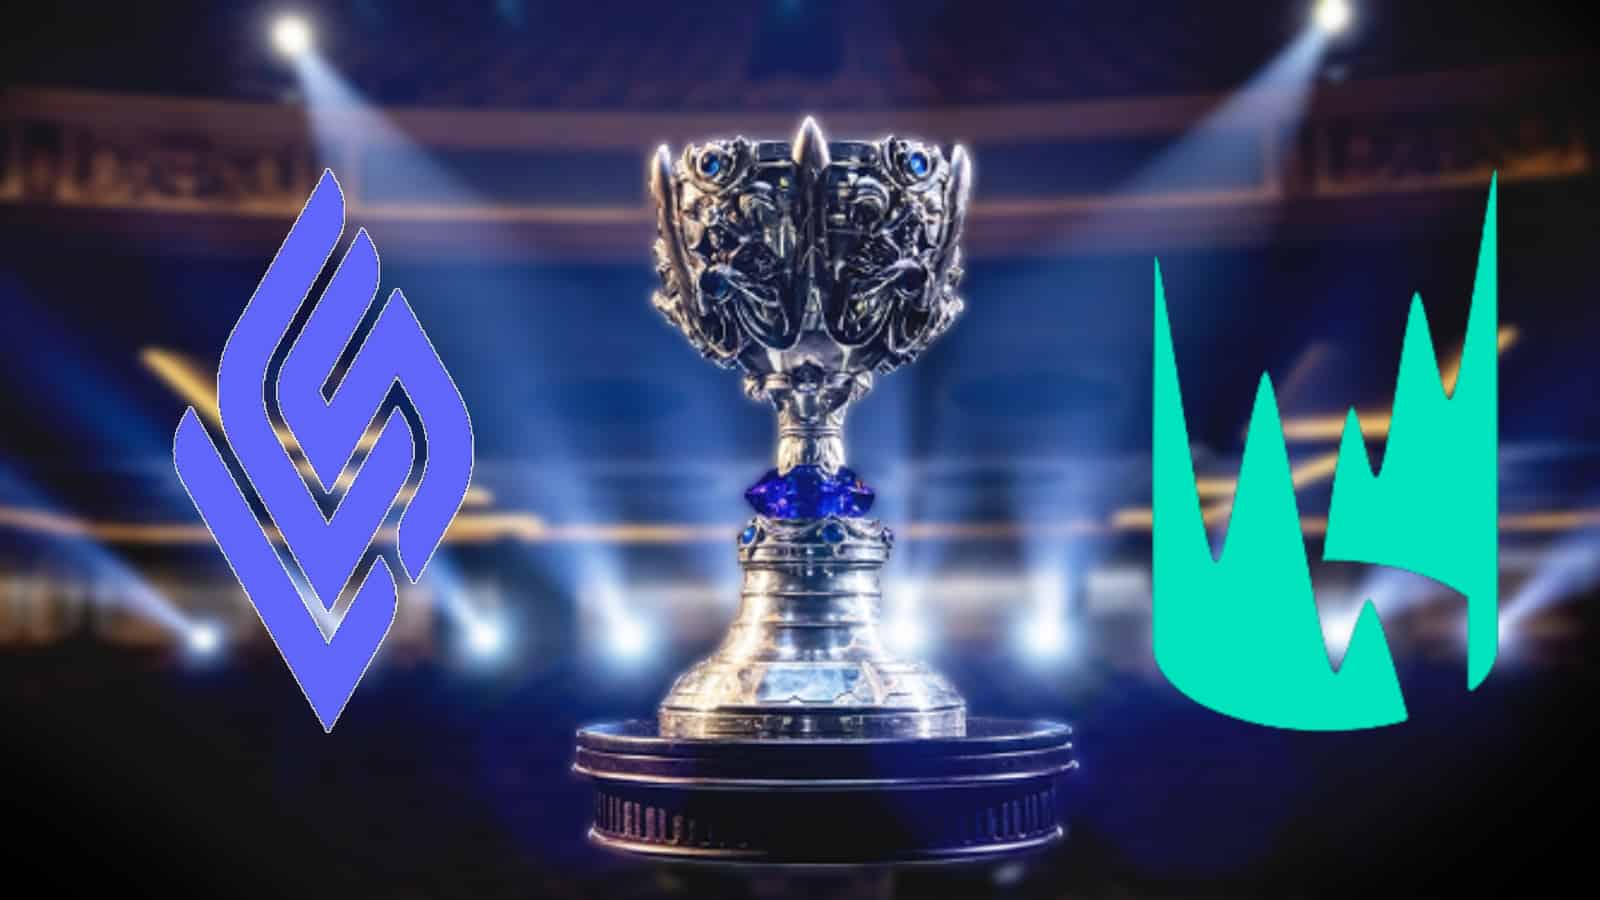 Western teams post worst showing at Worlds with 0 Knockout game wins